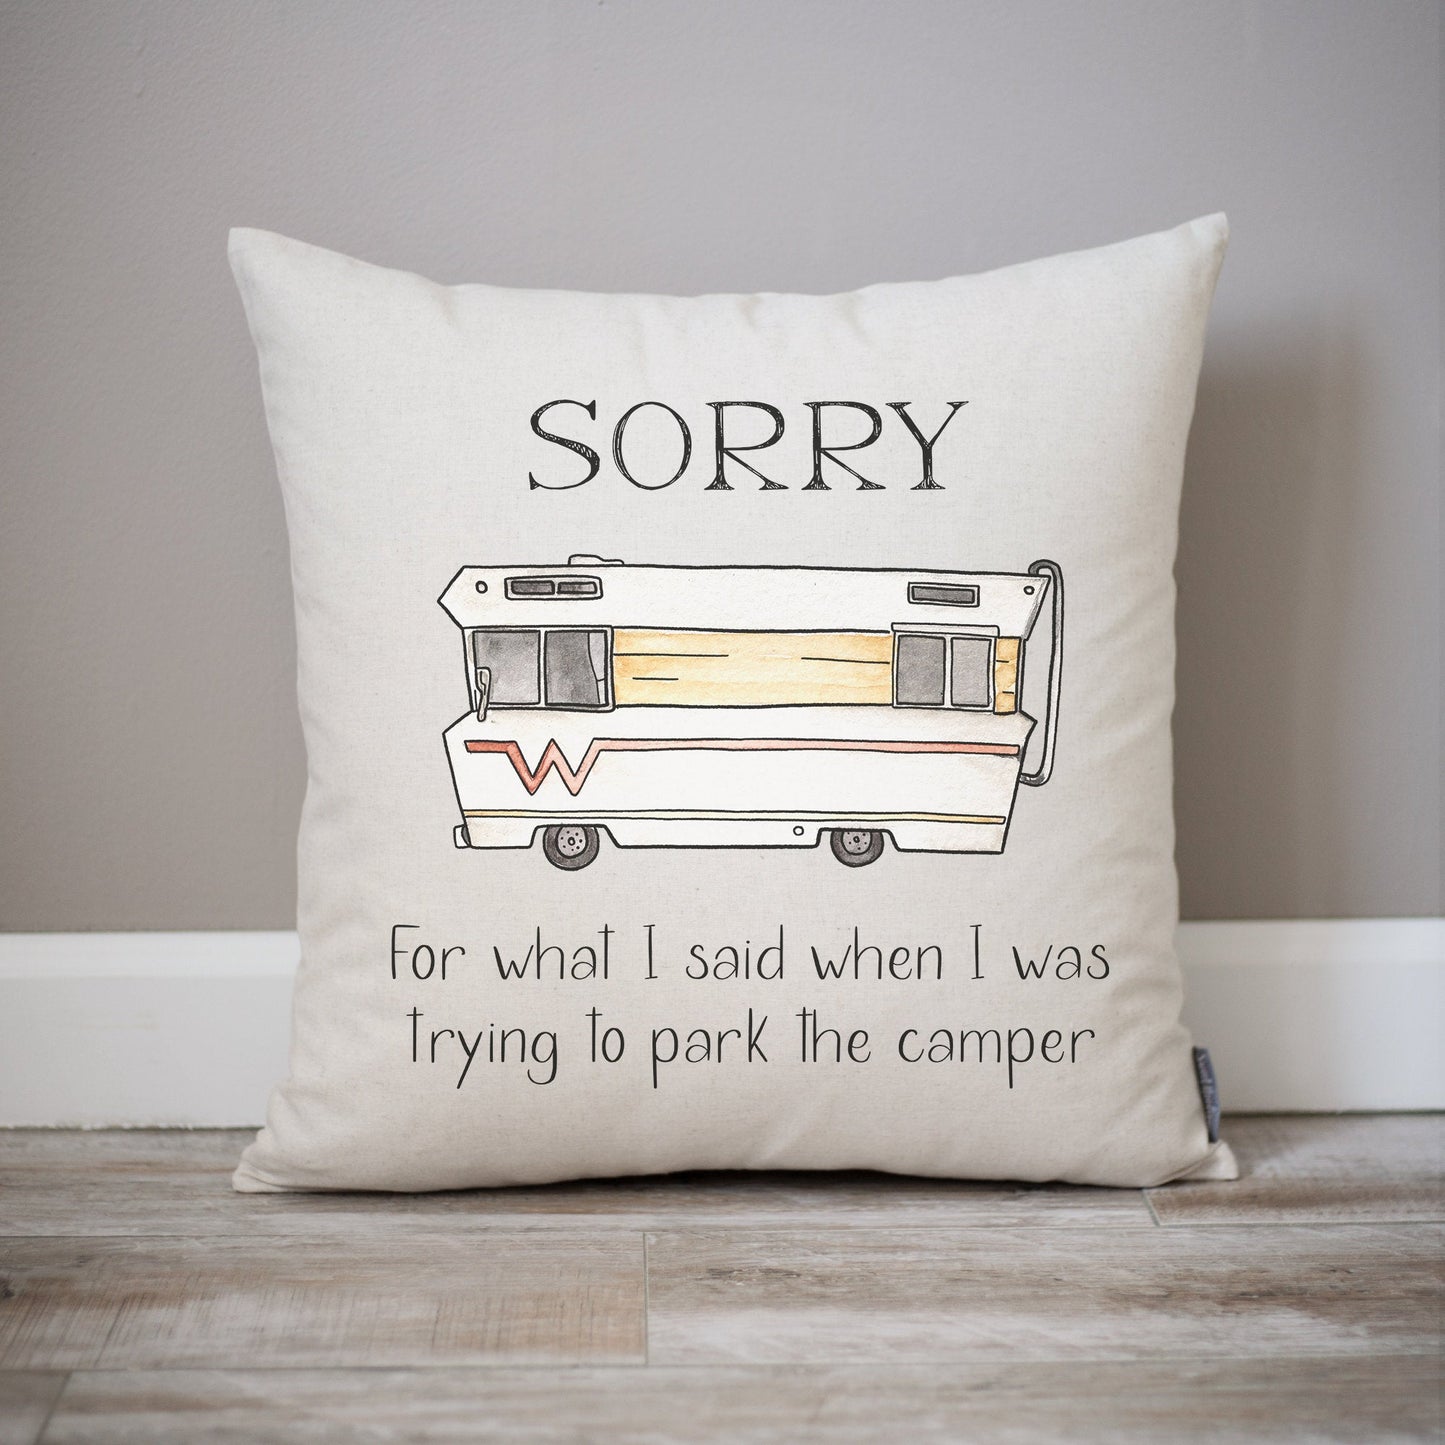 Load image into Gallery viewer, Sorry For What I Said When I Was Trying to Park The Camper Pillow | Winnebago Camper Customizable Pillow for Camper Van Trailer Decor Gift - Sweet Hooligans Design
